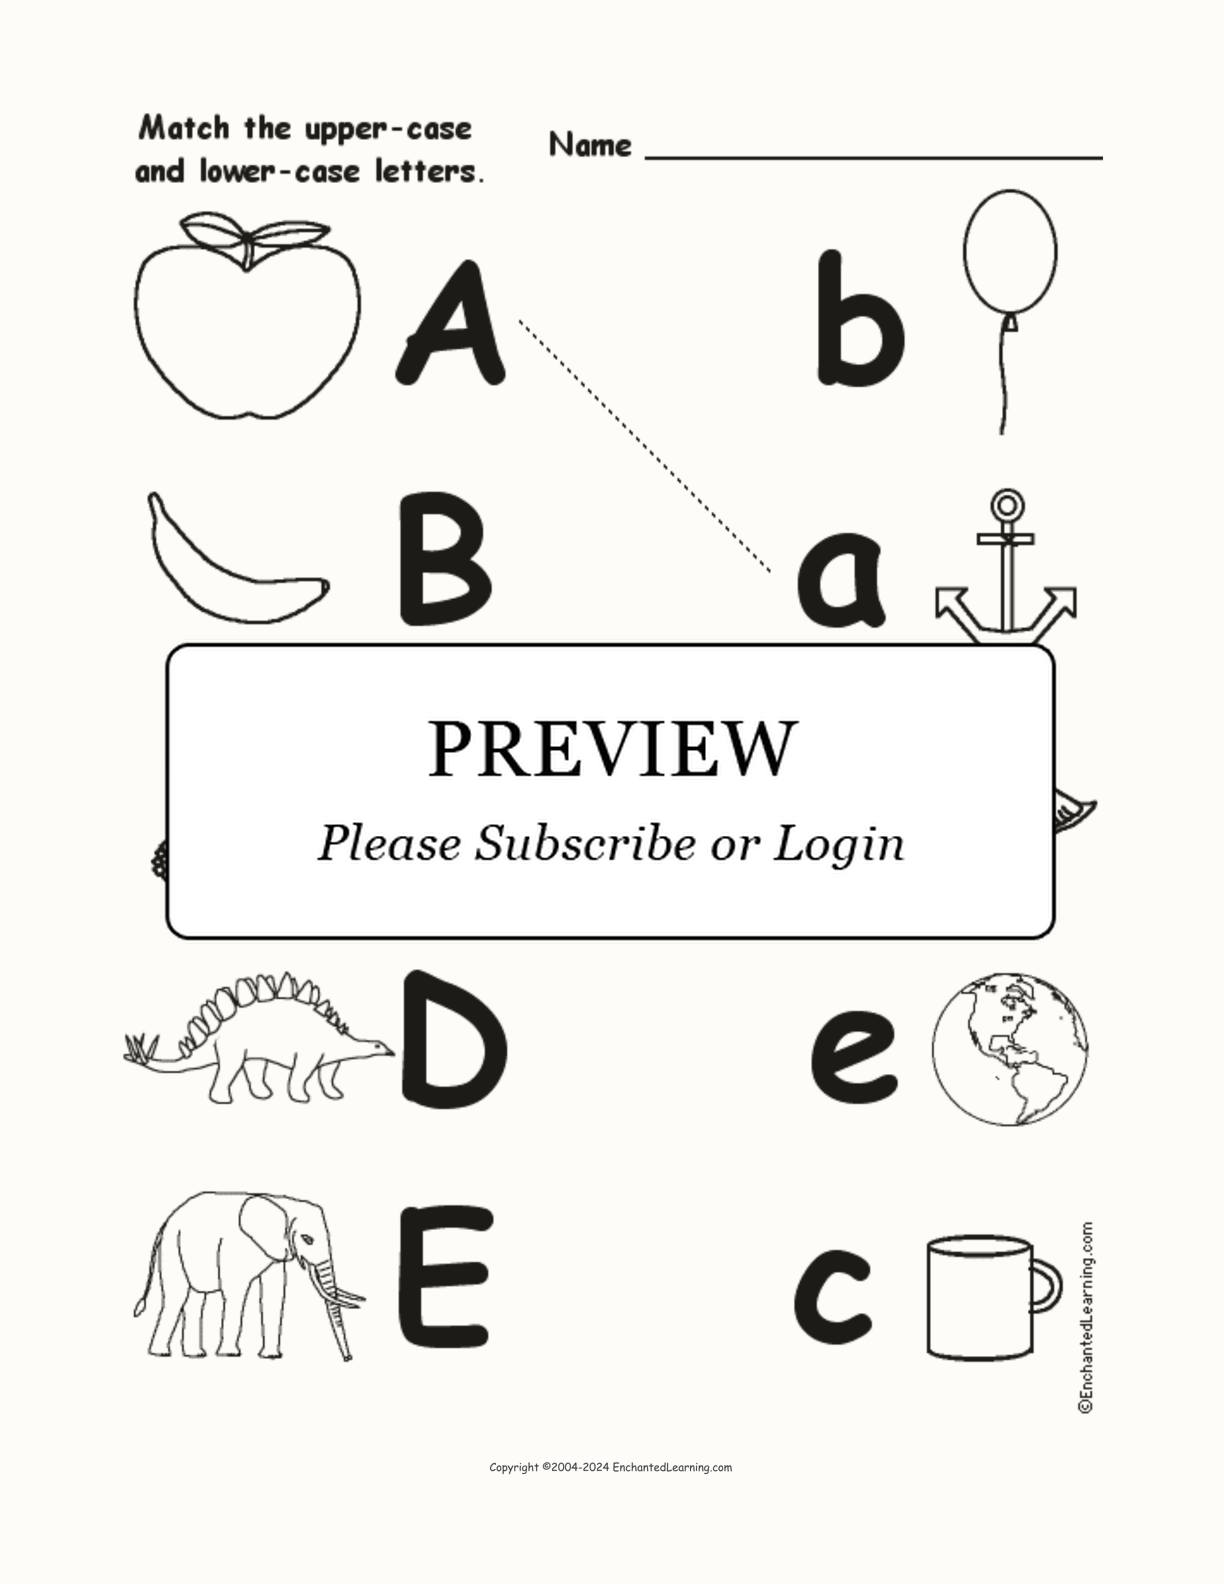 Match Uppercase and Lowercase Letters A-E interactive worksheet page 1